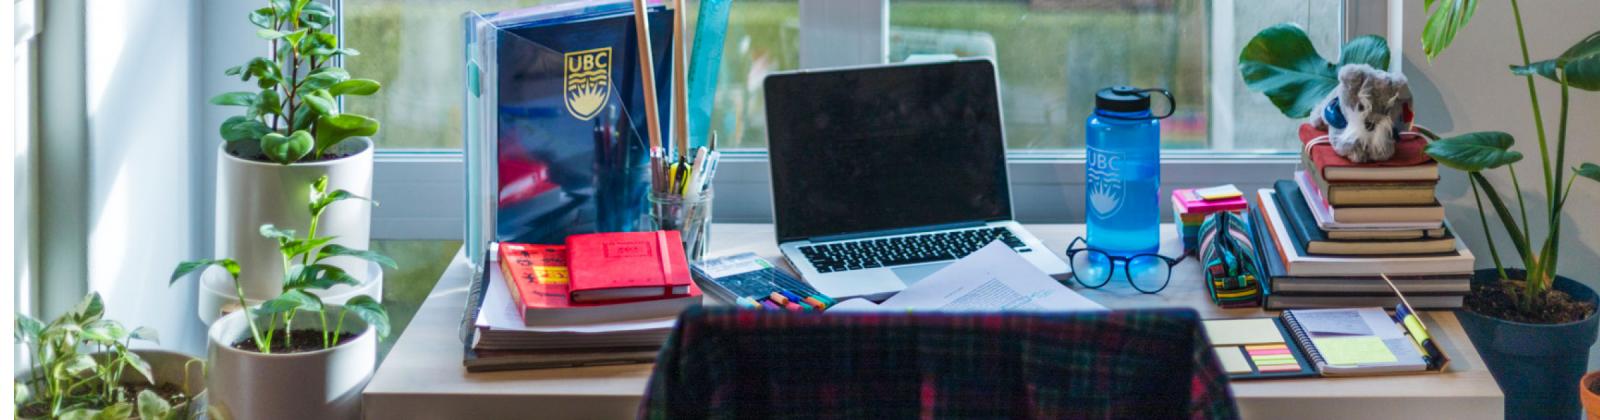 A student's desk with laptop and books